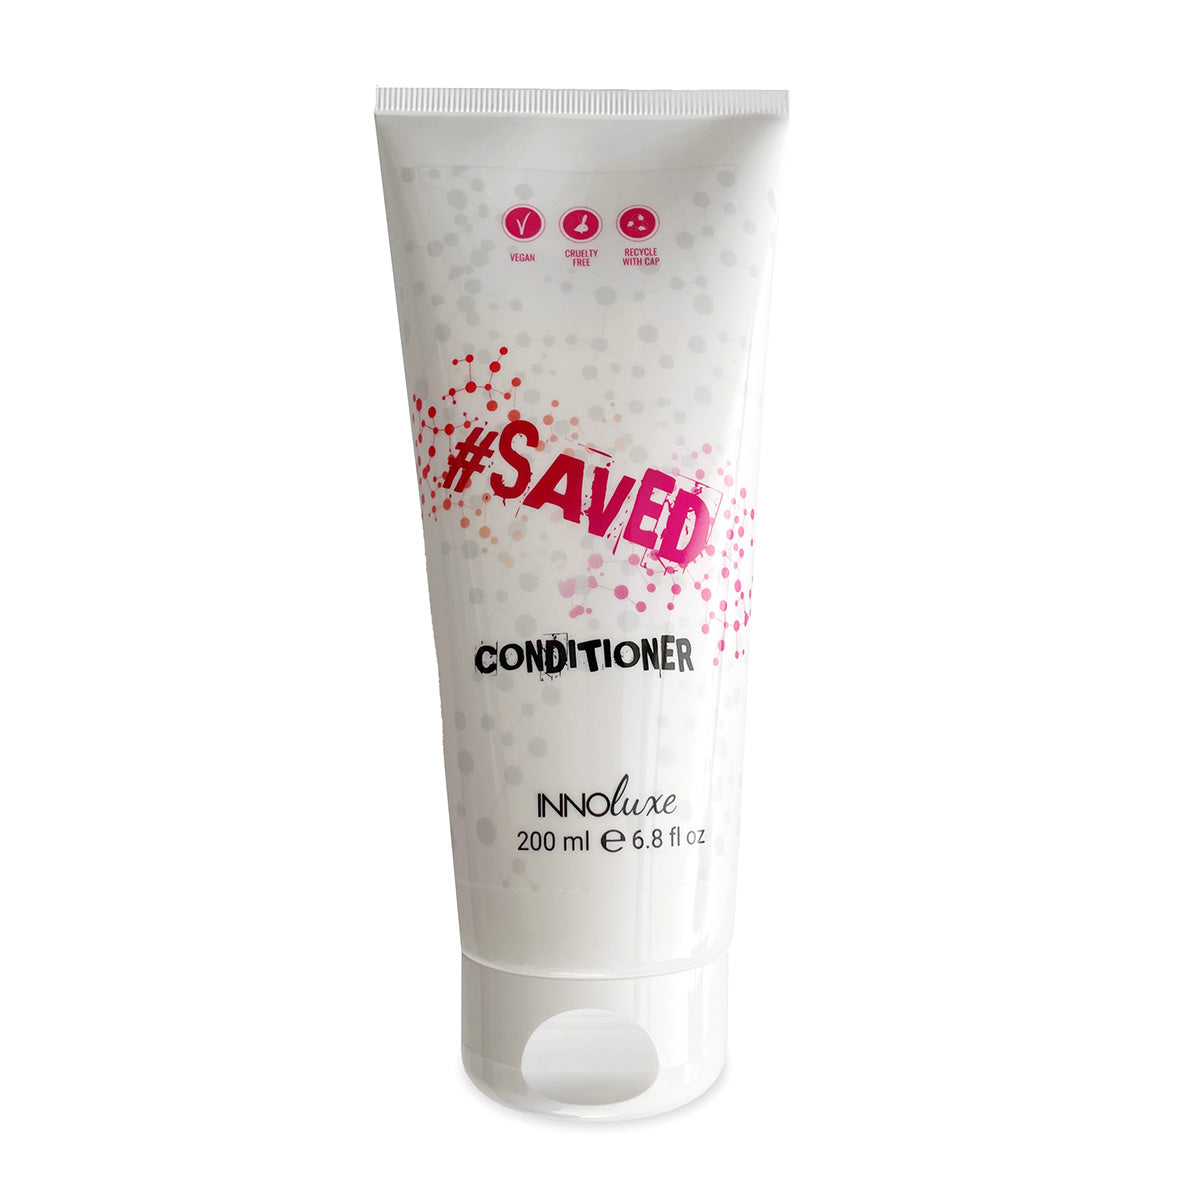 Innoluxe #SAVED Conditioner